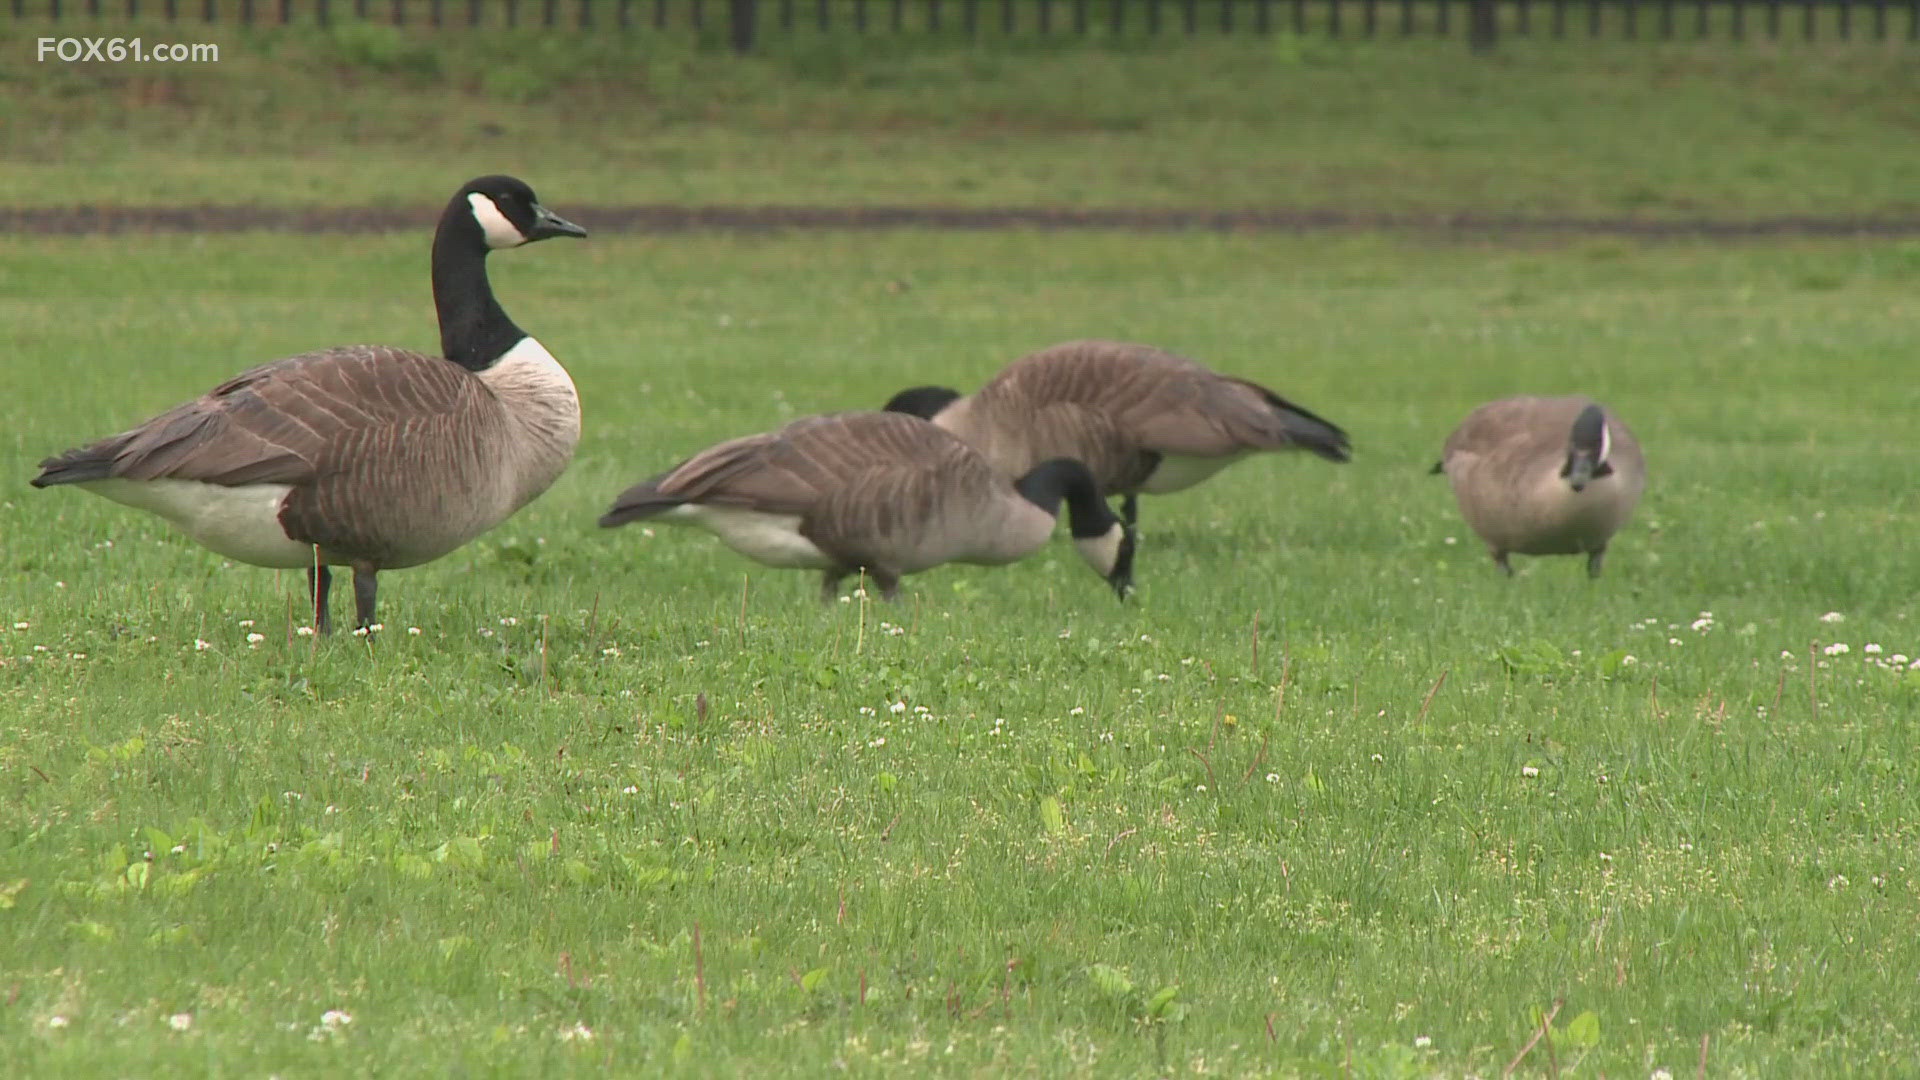 The geese management plan now heads to the city's policy committee for consideration, but as far as what the city will do to address the geese remains a mystery.